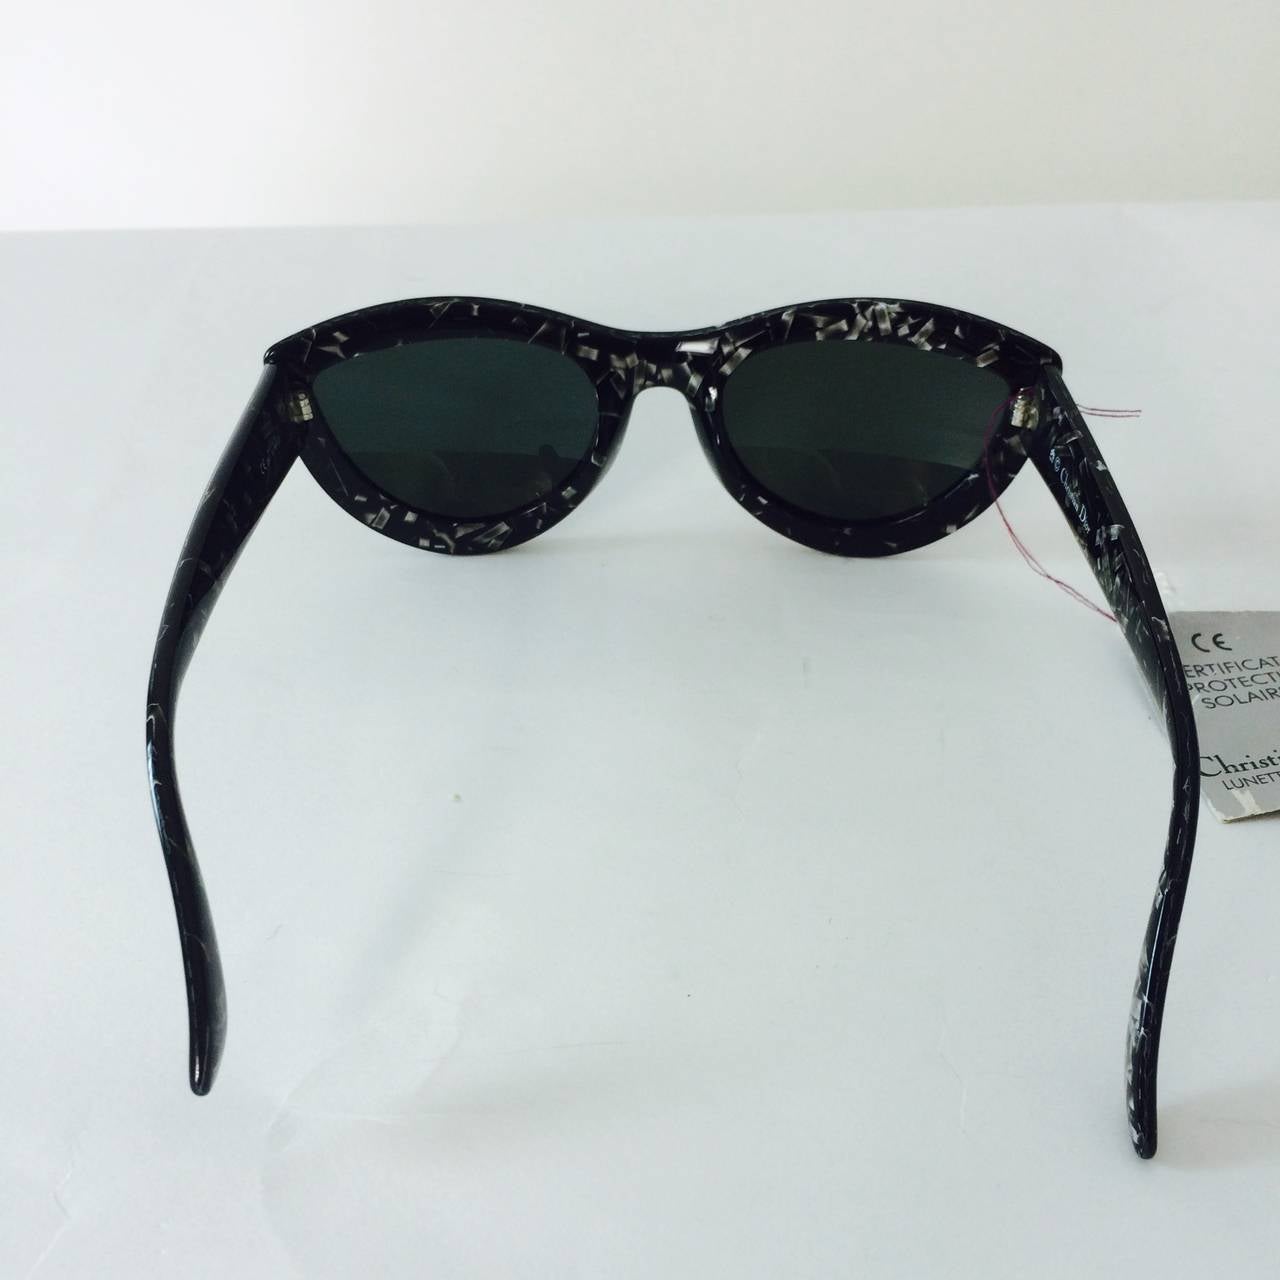 Christian Dior Lunettes De Soleil sunglasses from the 1970s never worn with the original tags...Black frames have geometric bits of grey & white floating through, that create a very mid century look...Modified cat eye frames have original smoke grey